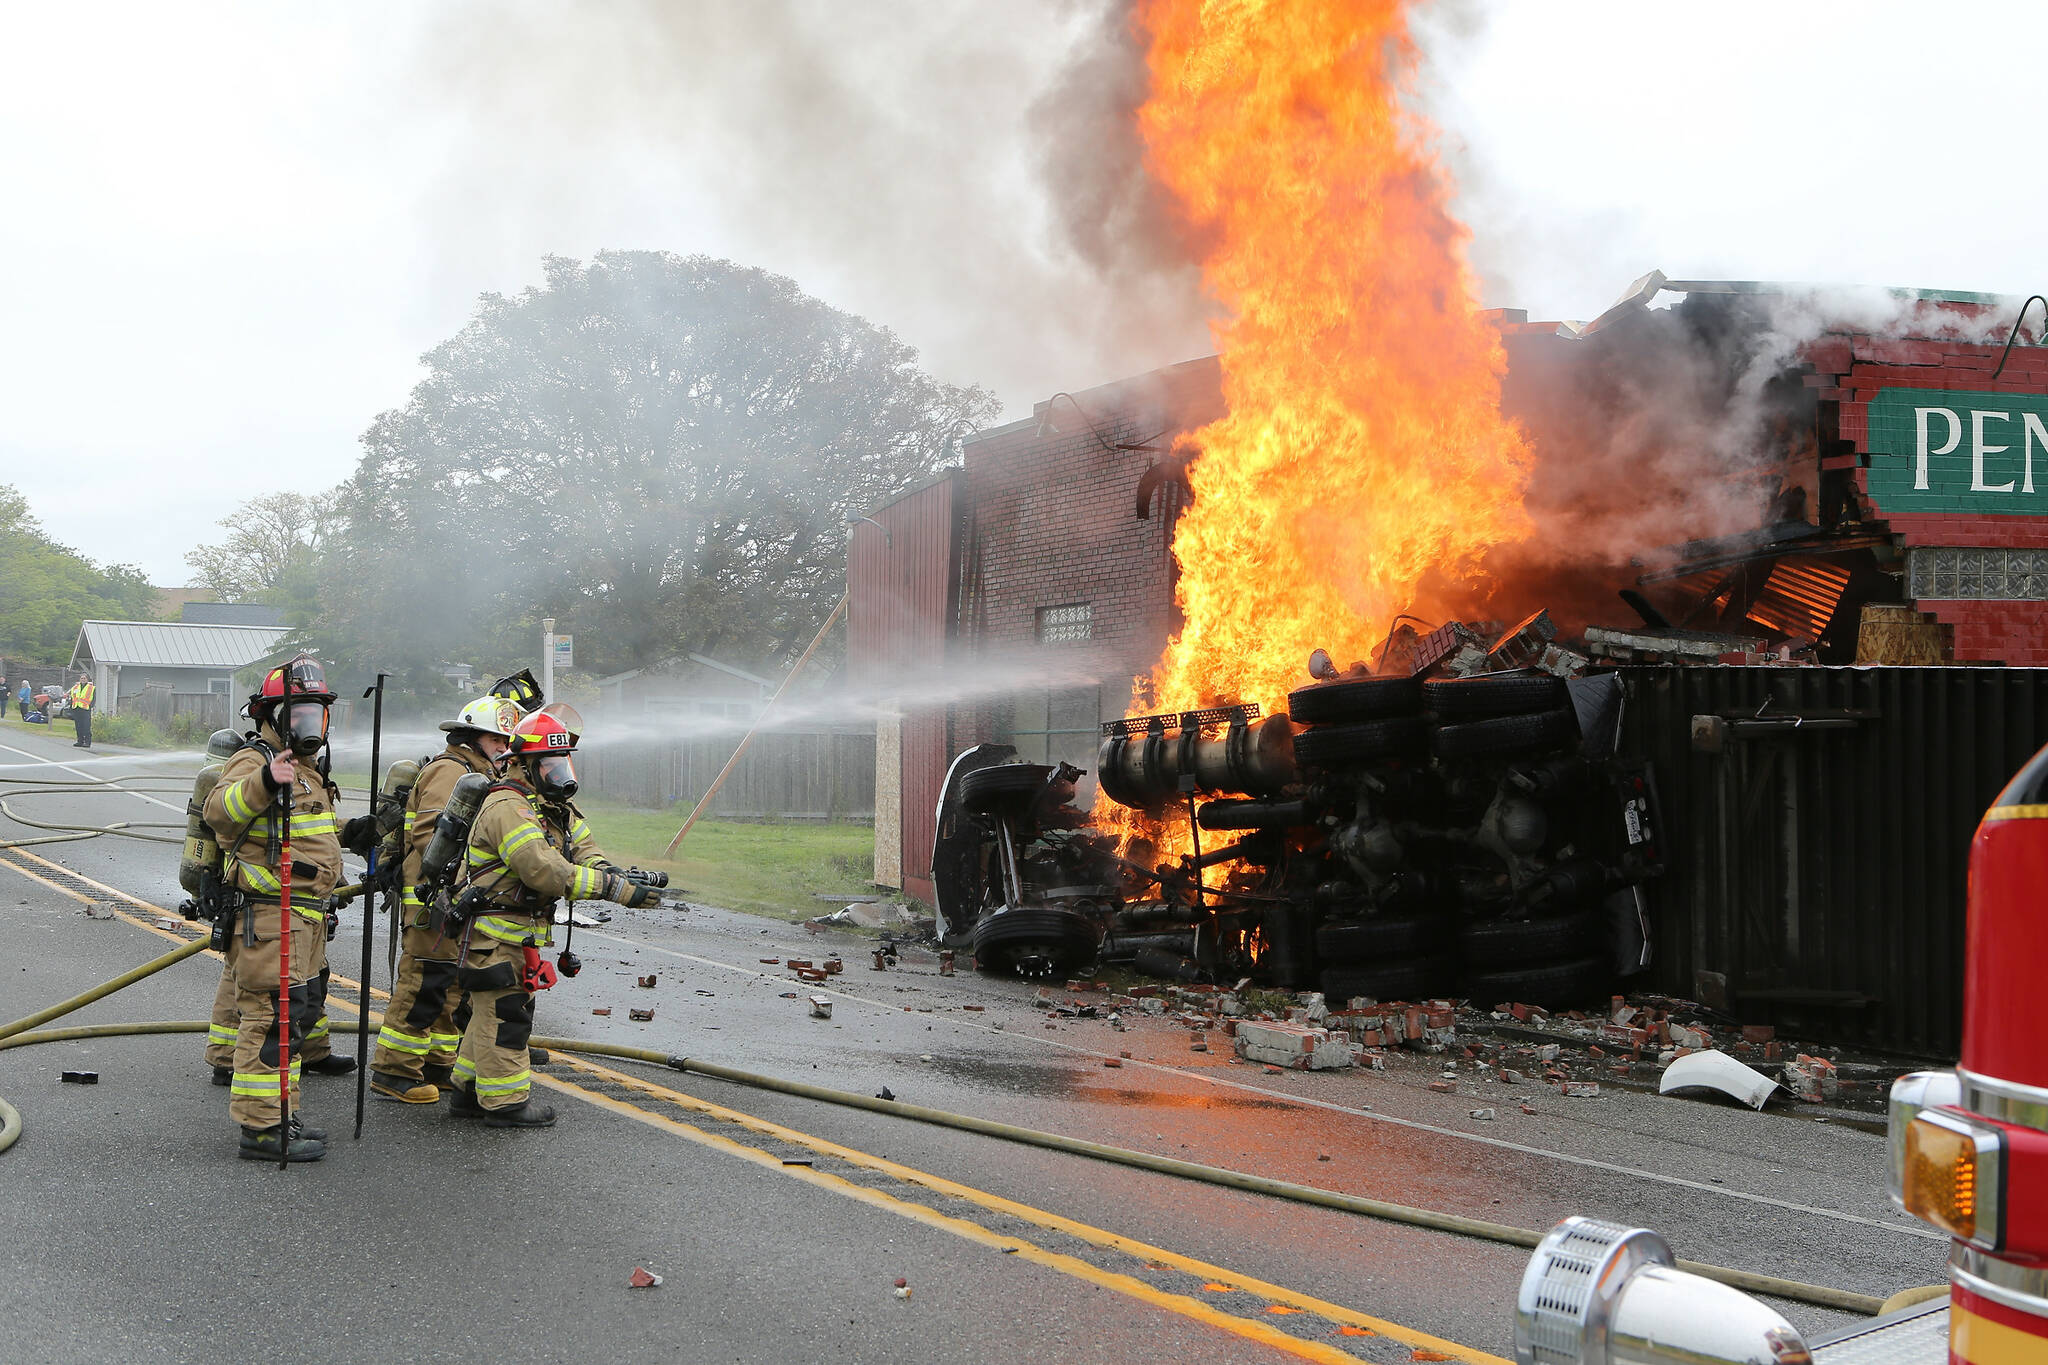 Photo by John Fisken
North Whidbey Fire and Rescue firefighters battle a blaze at Penn Cove Pottery after a semi truck crashed into the historic building Sunday morning.